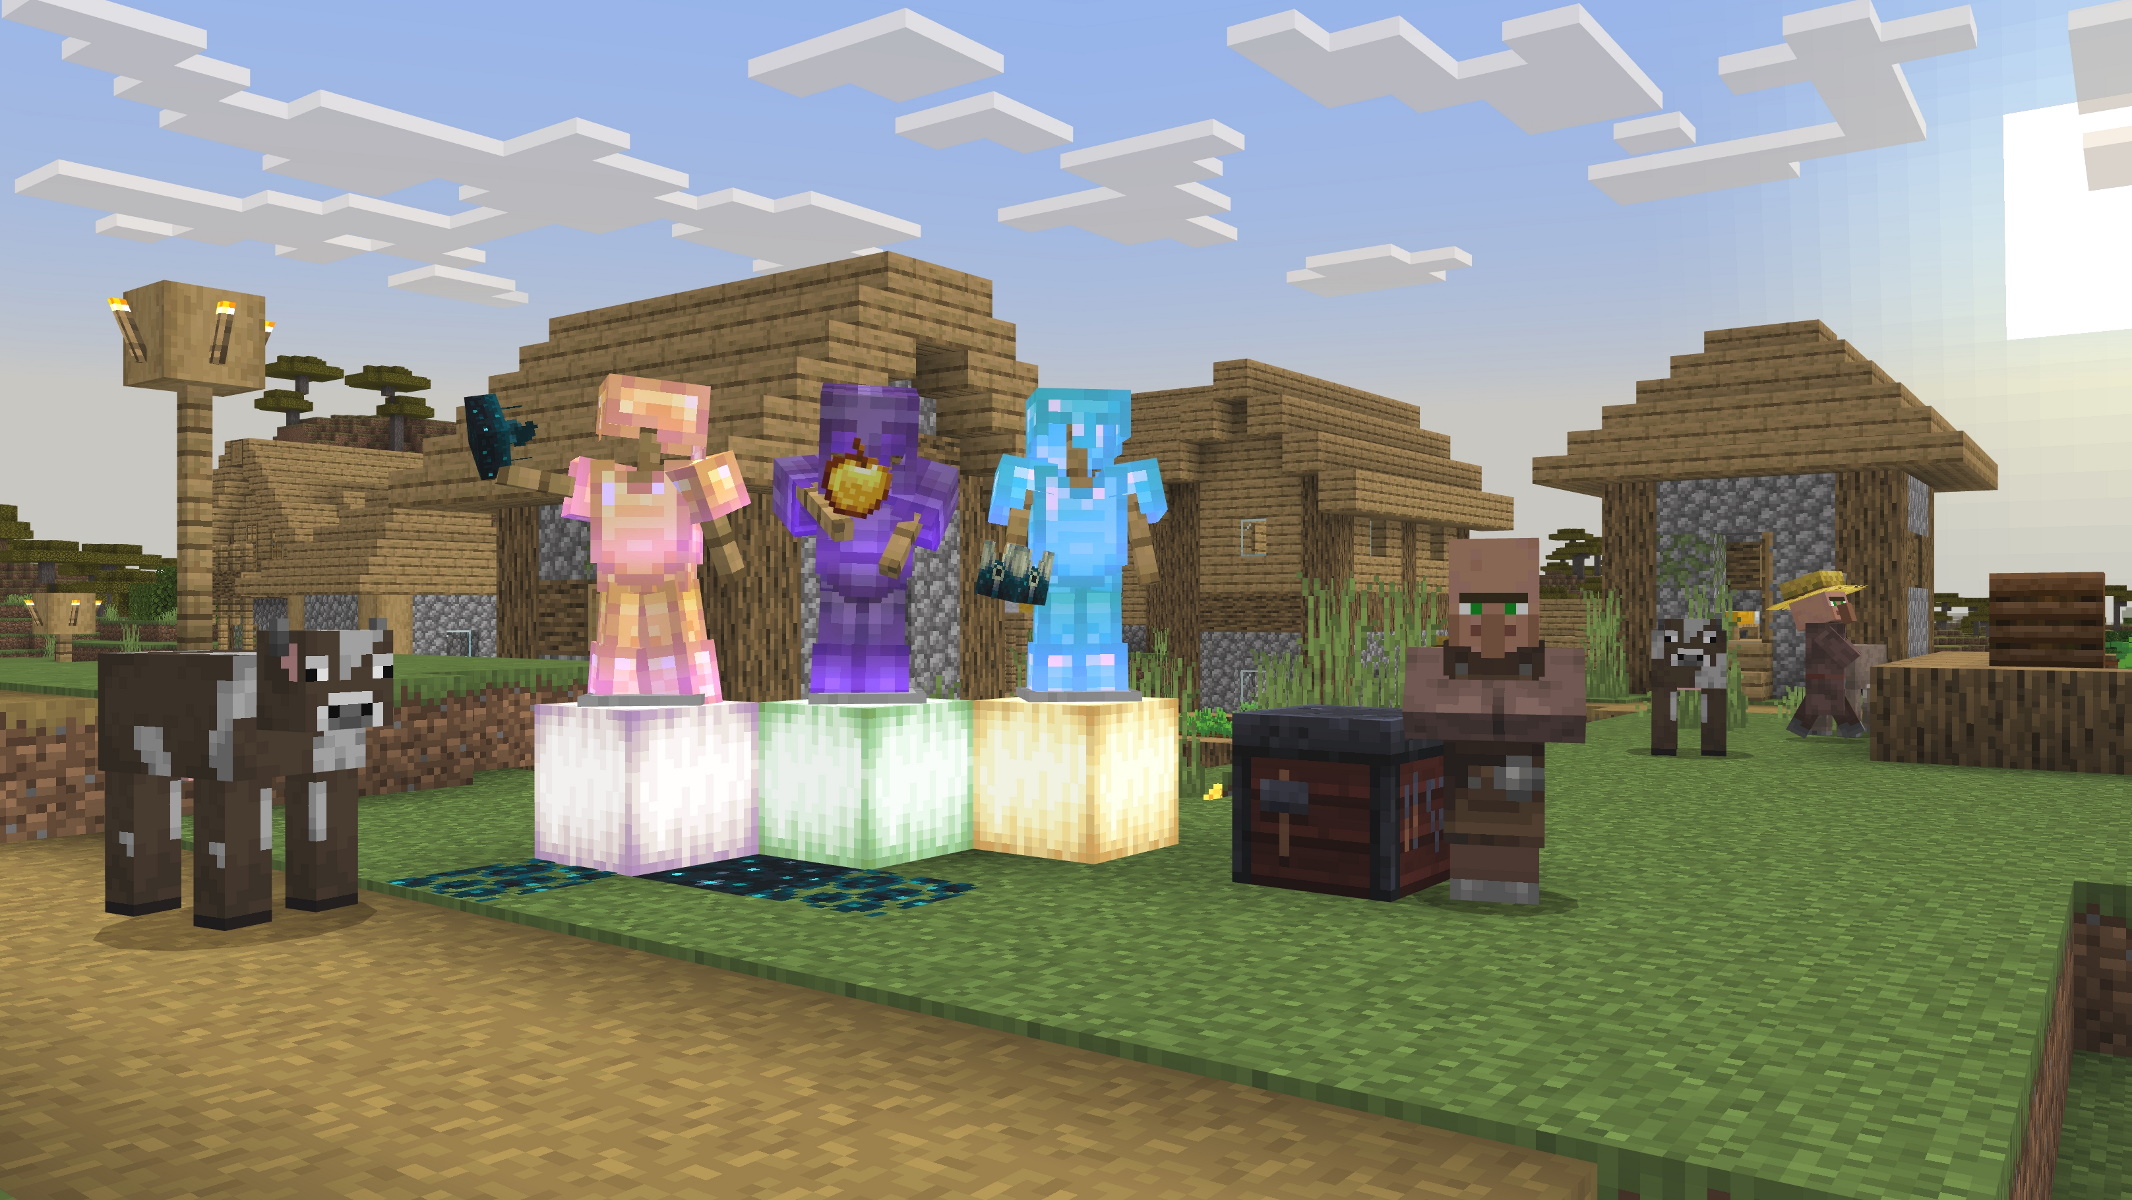 A Minecraft Village scene with armour stands